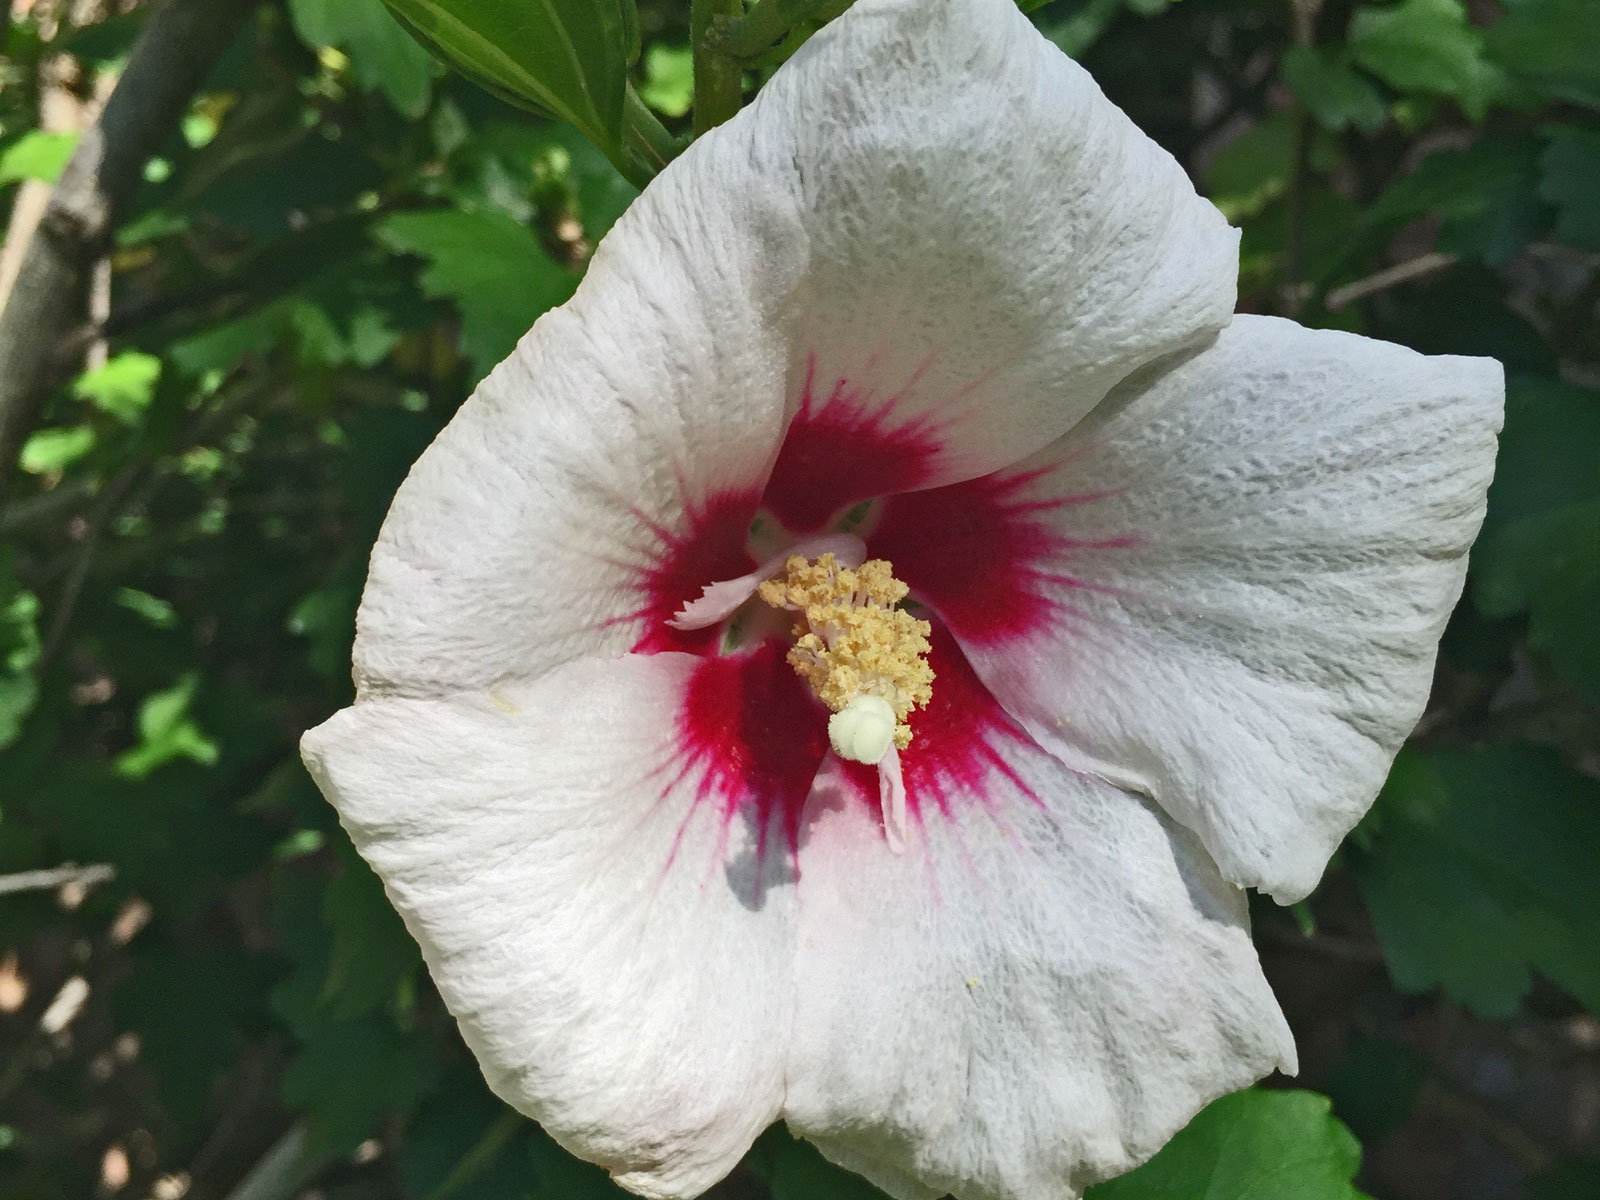 althea - rose of sharon